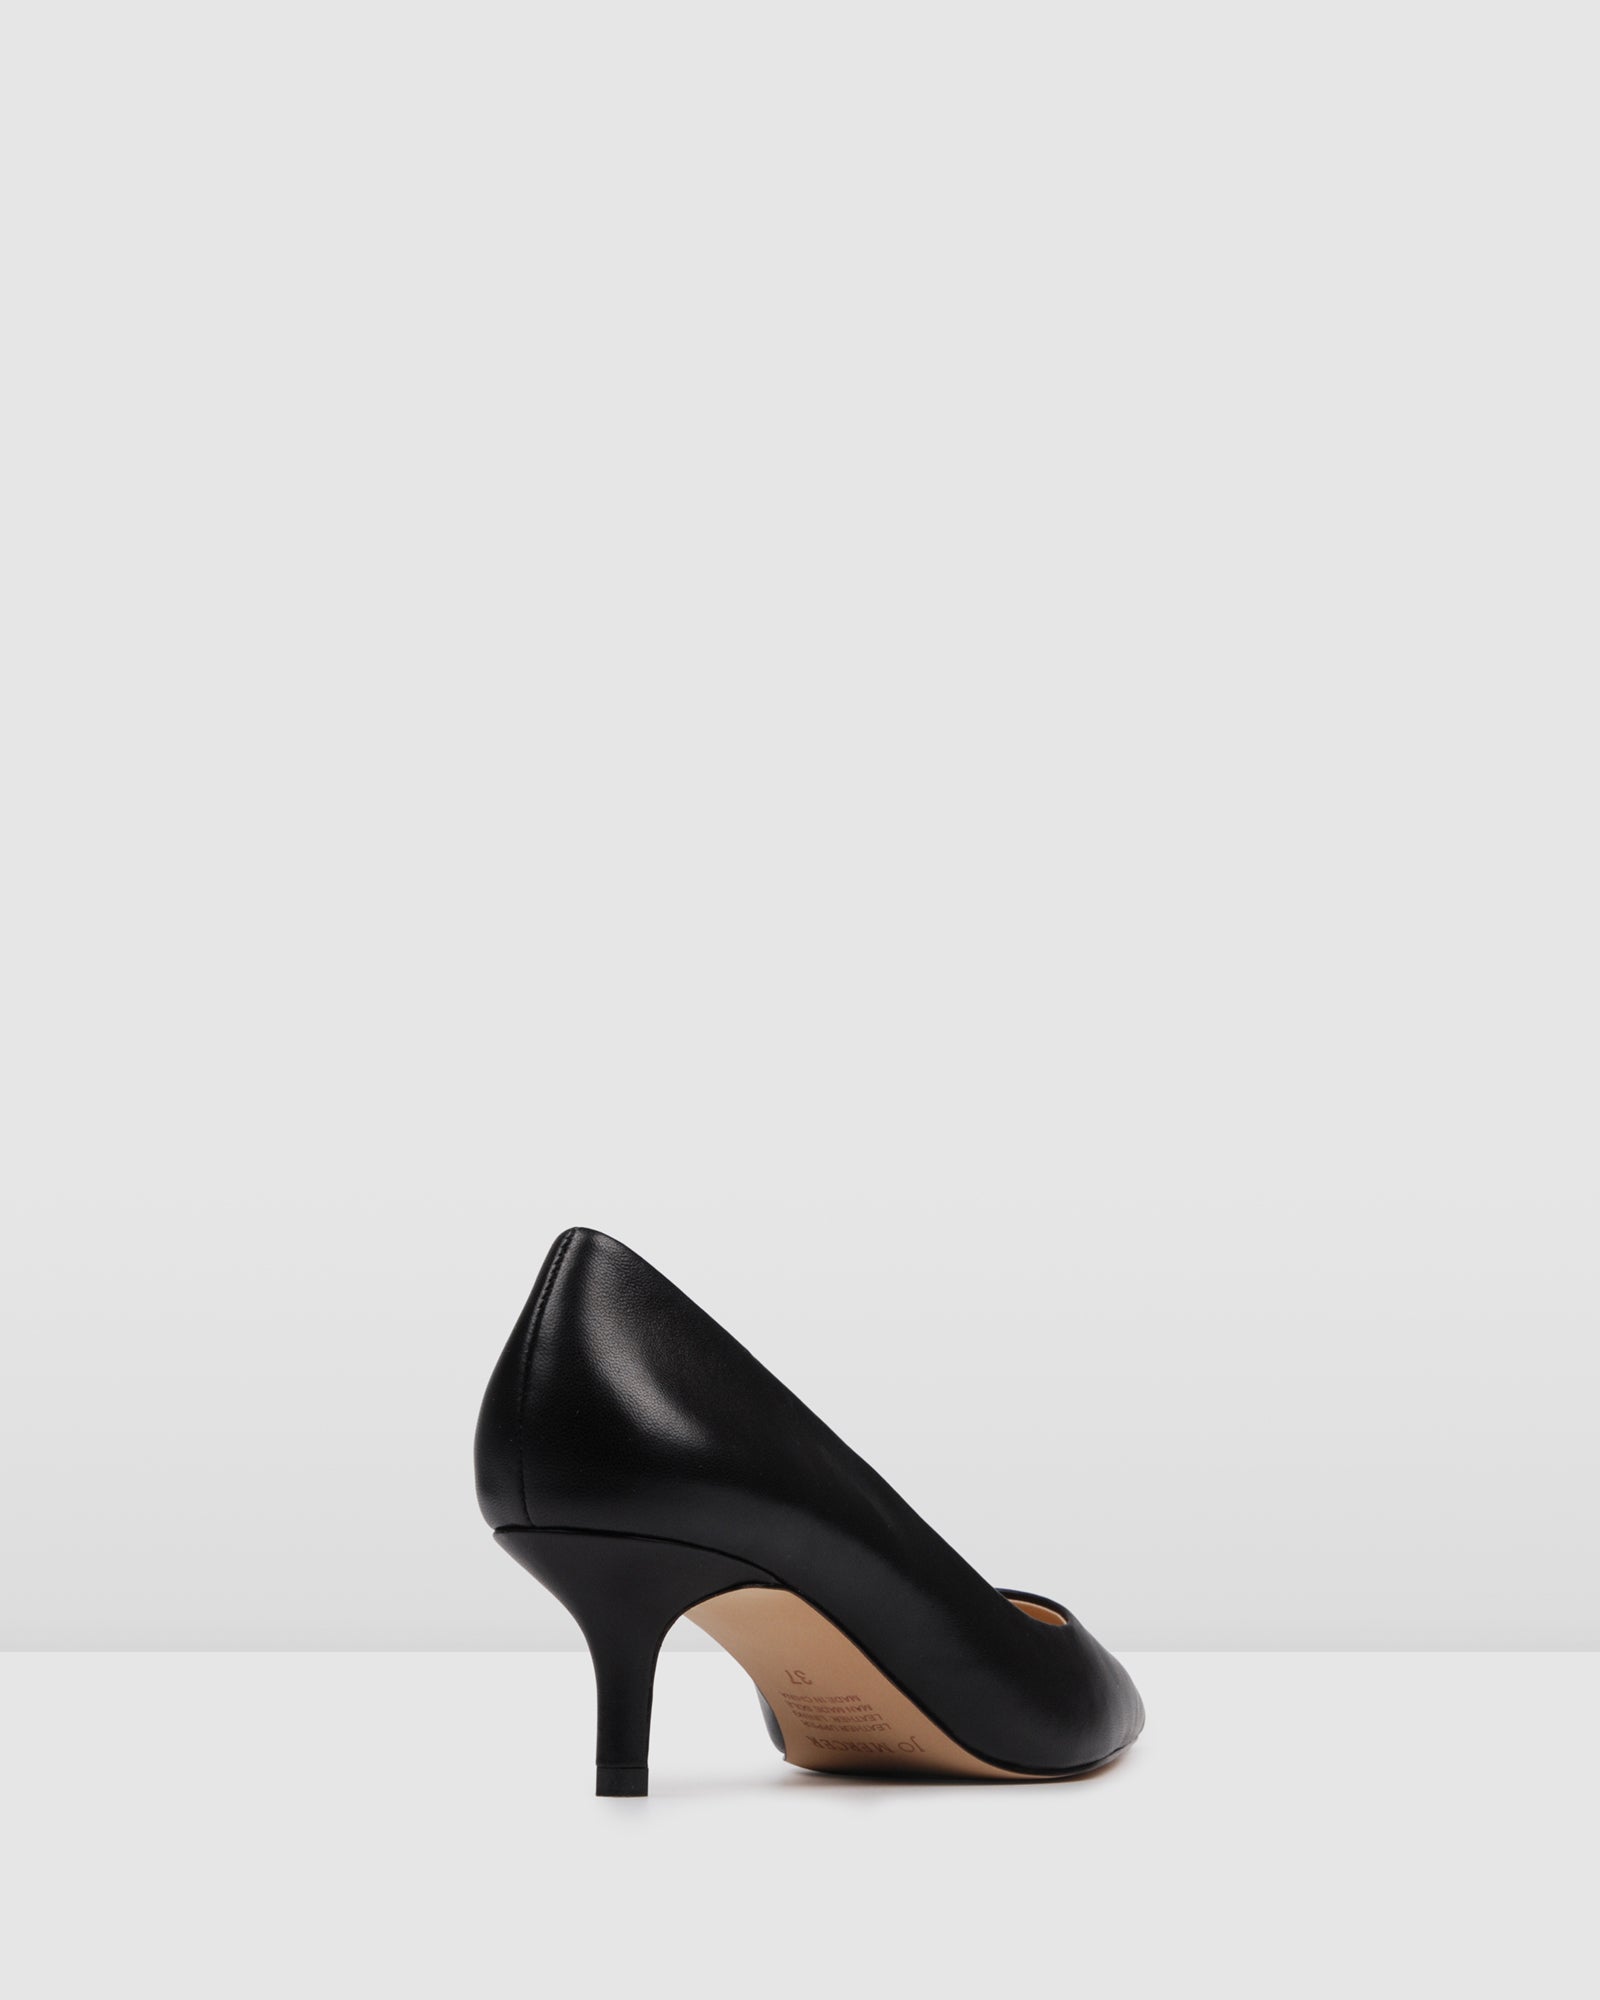 black leather court shoes low heel